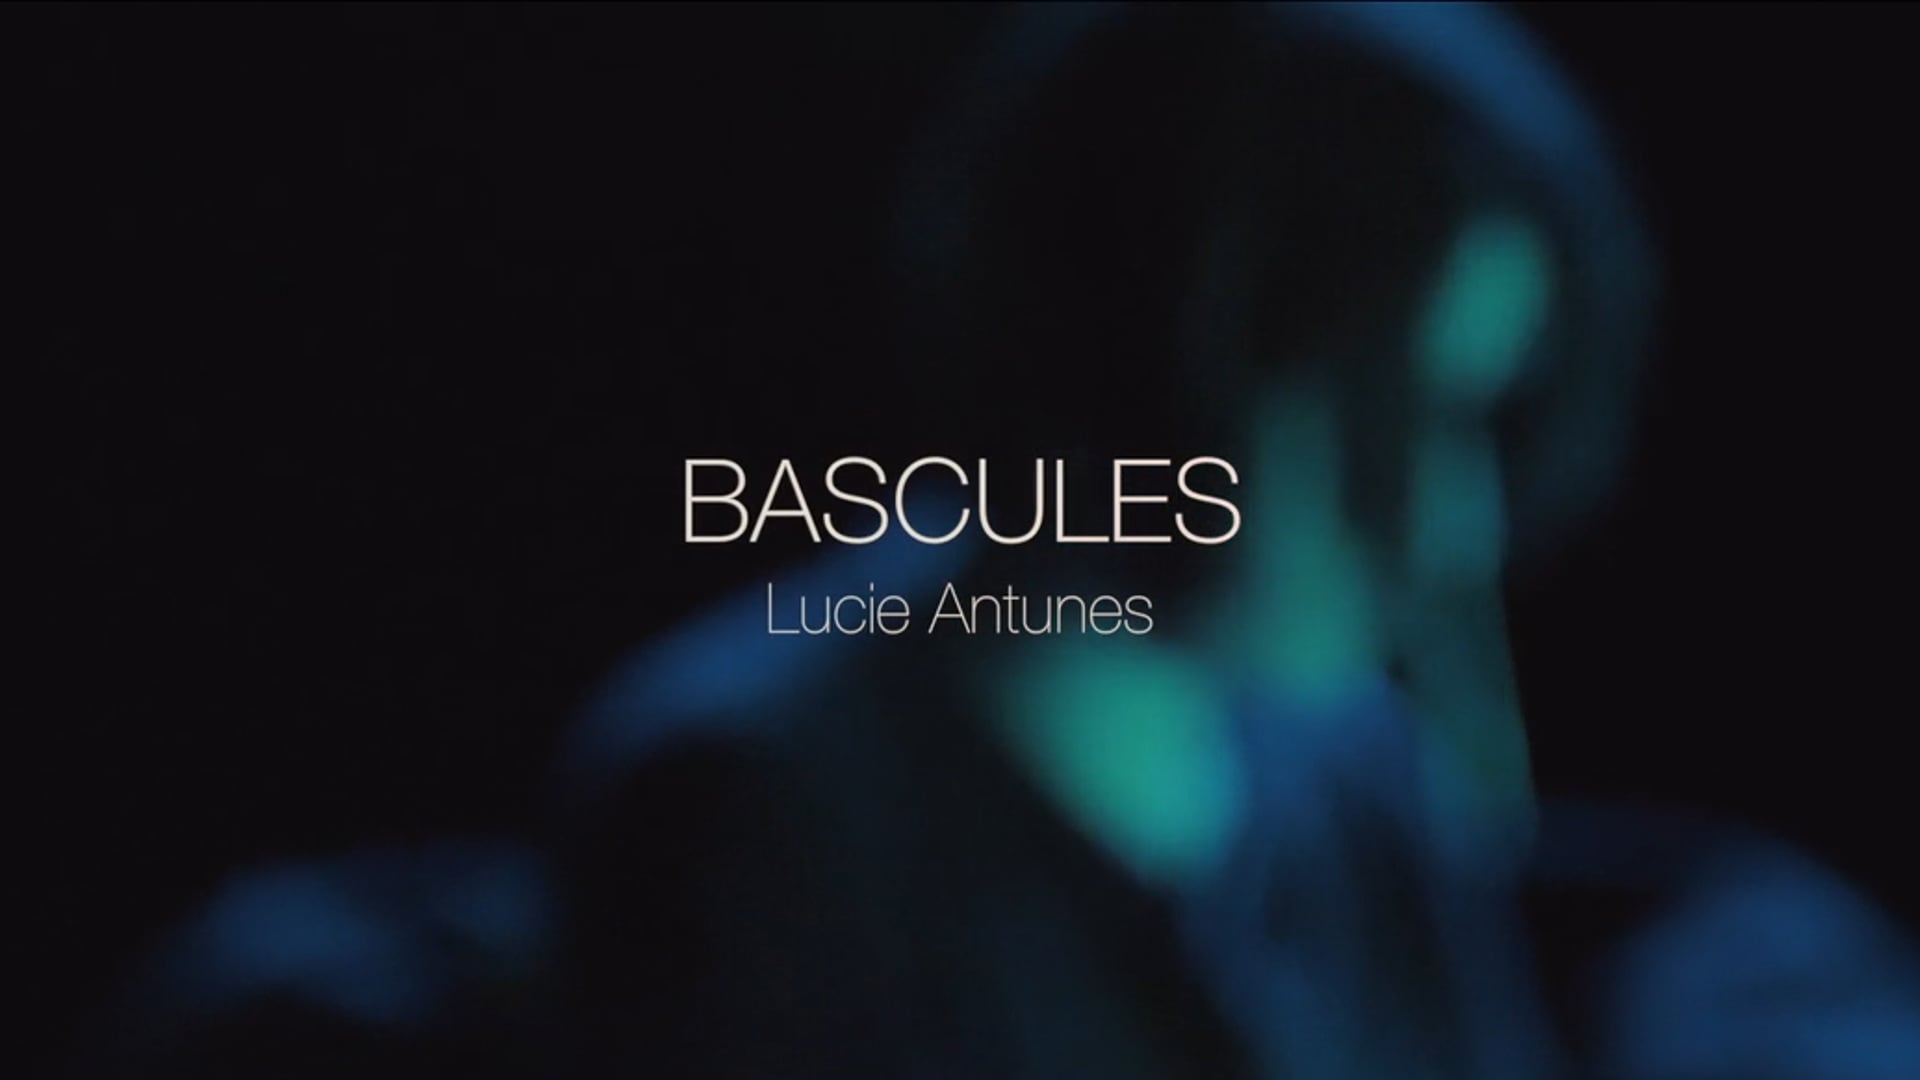 Bascules / Lucie Antunes - teaser